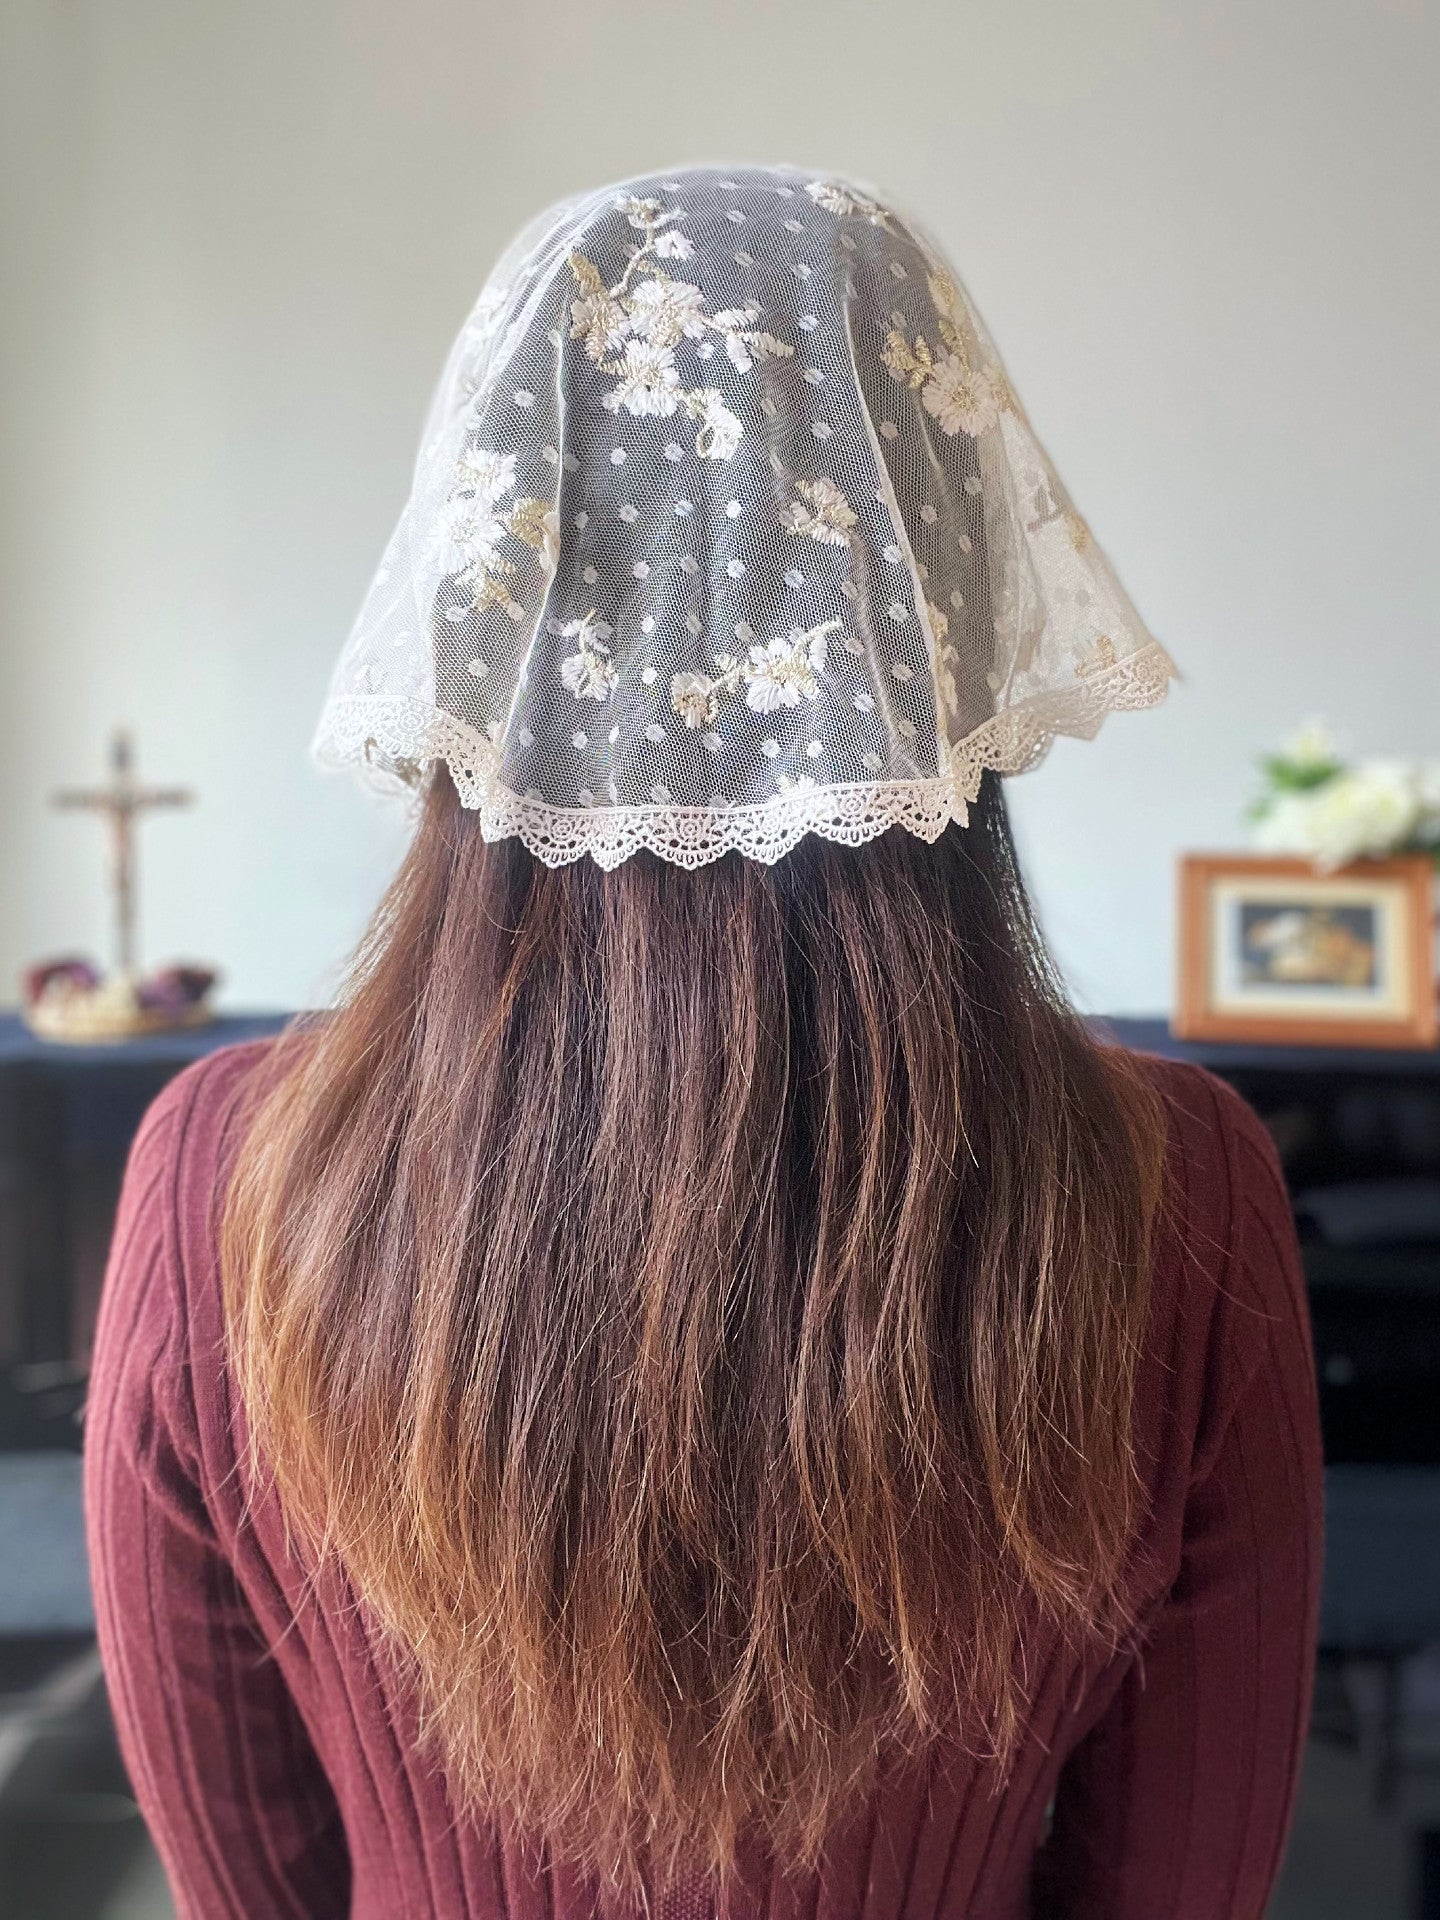 "Veni Creator" Floral Dotted Tulle Headwrap Veil (Ivory/Gold)